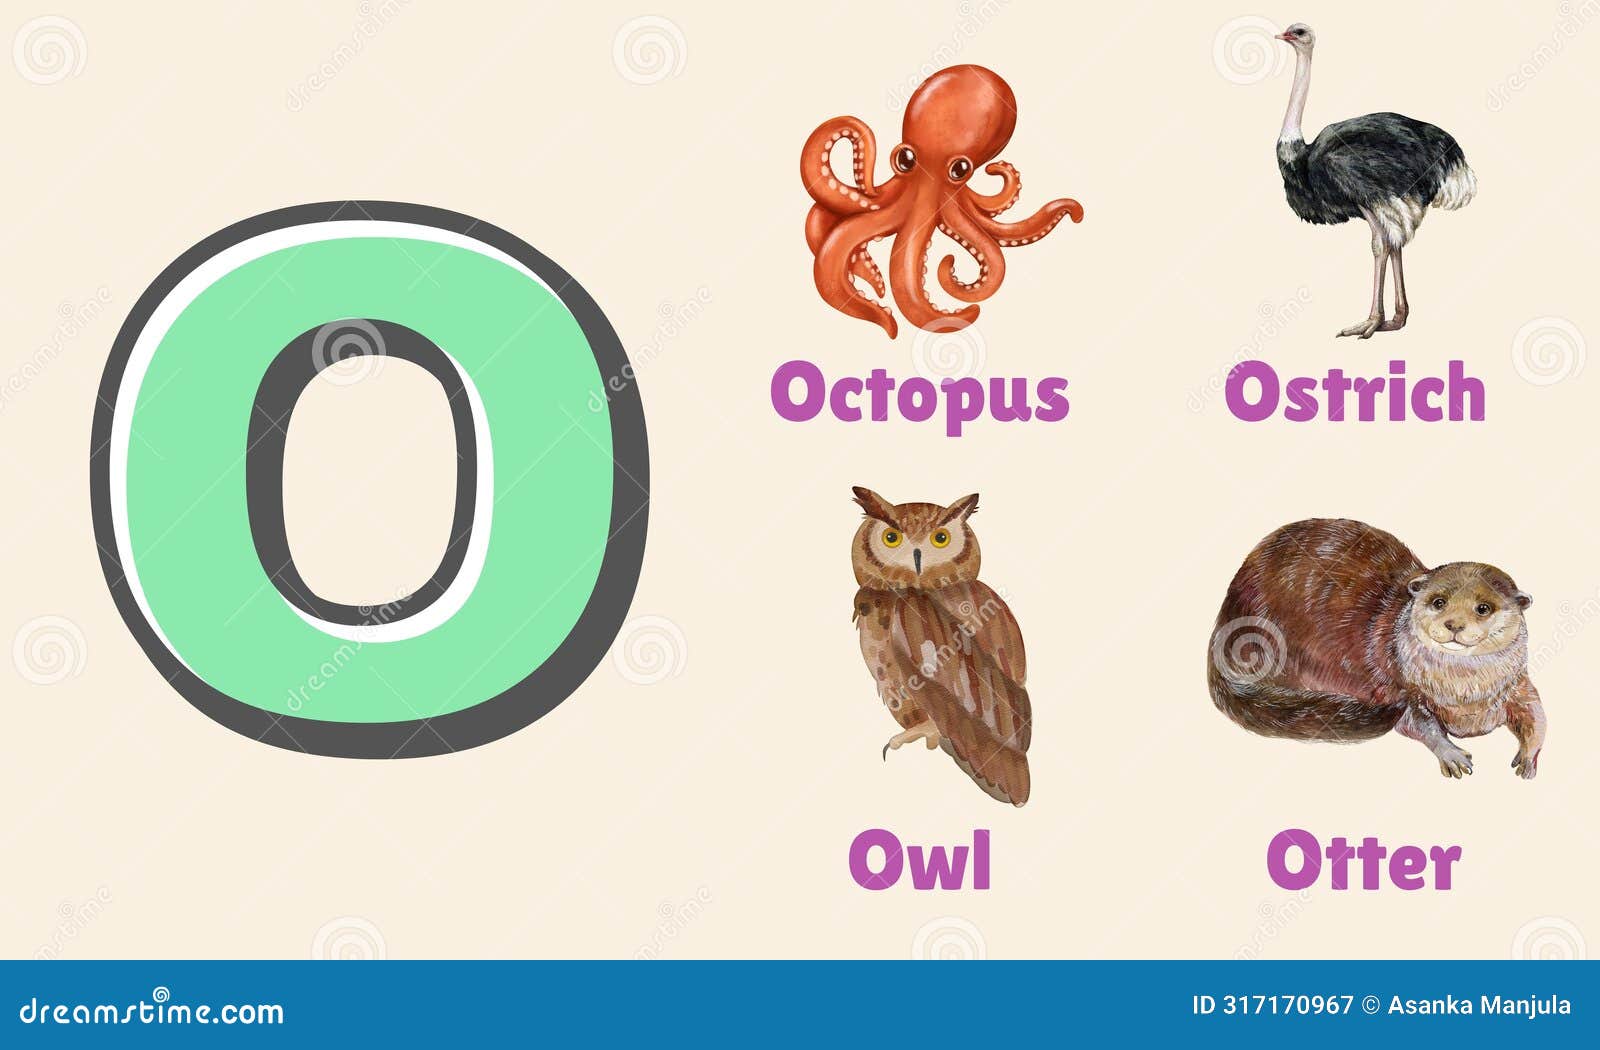 alphabet letter o in pictures, animals starting with o